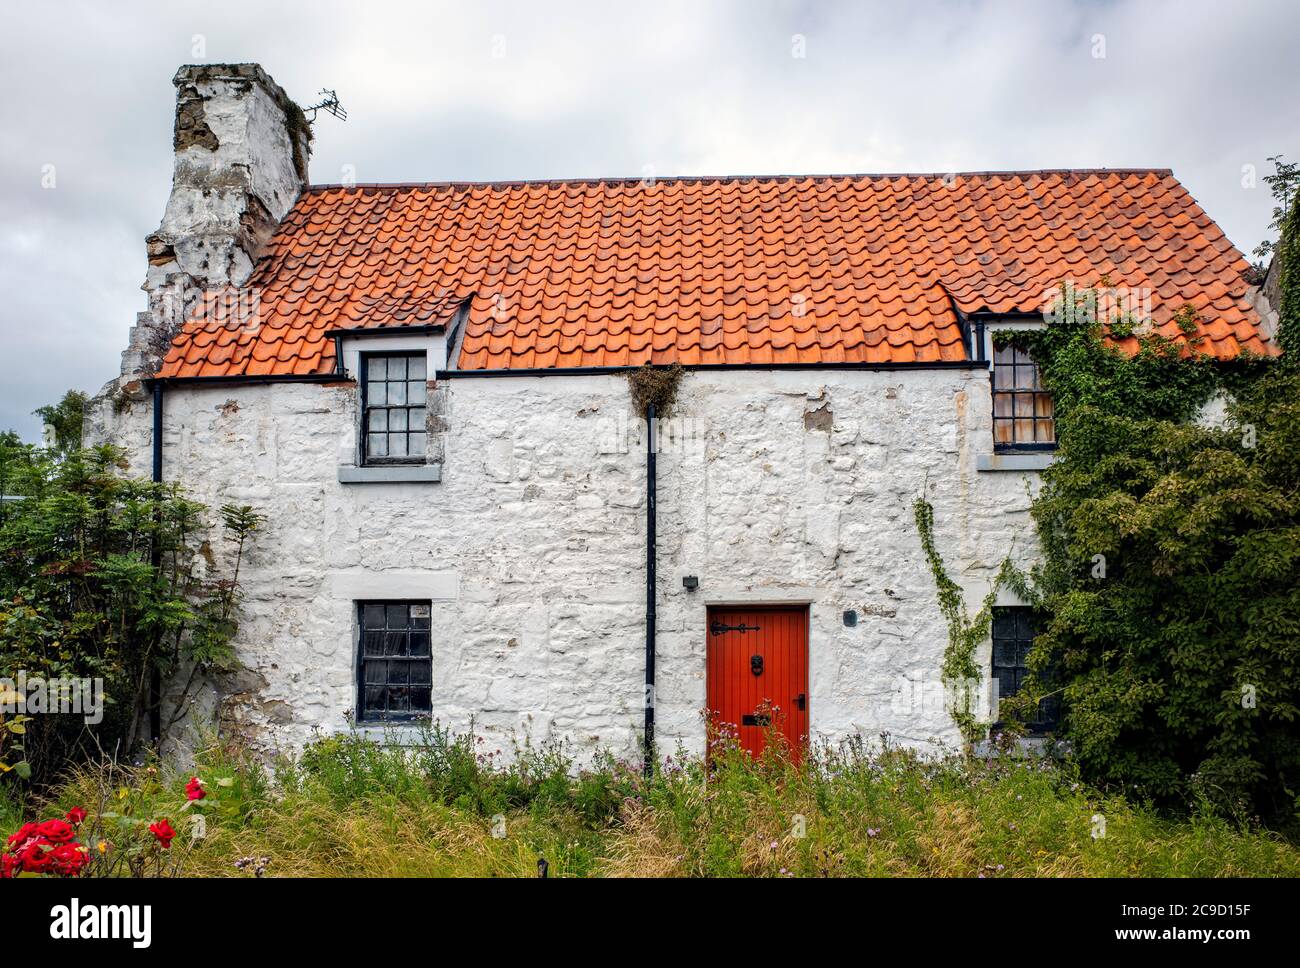 Cottage with overgrown garden in the village of Aberlady, East Lothian, Scotland, UK. Stock Photo